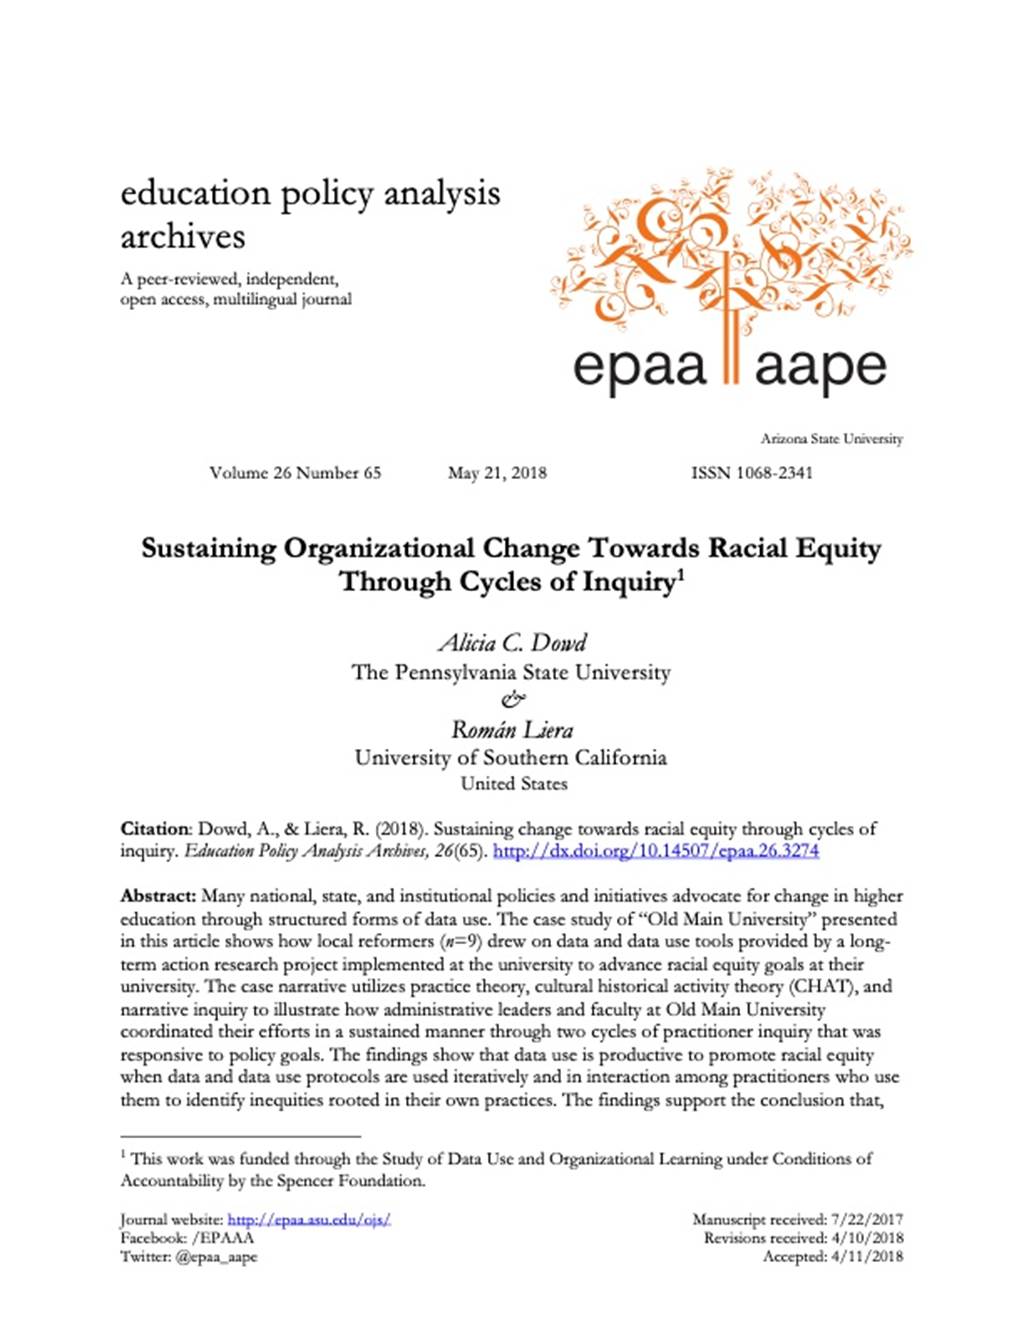 Sustaining Organizational Change Towards Racial Equity Through Cycles of Inquiry document image